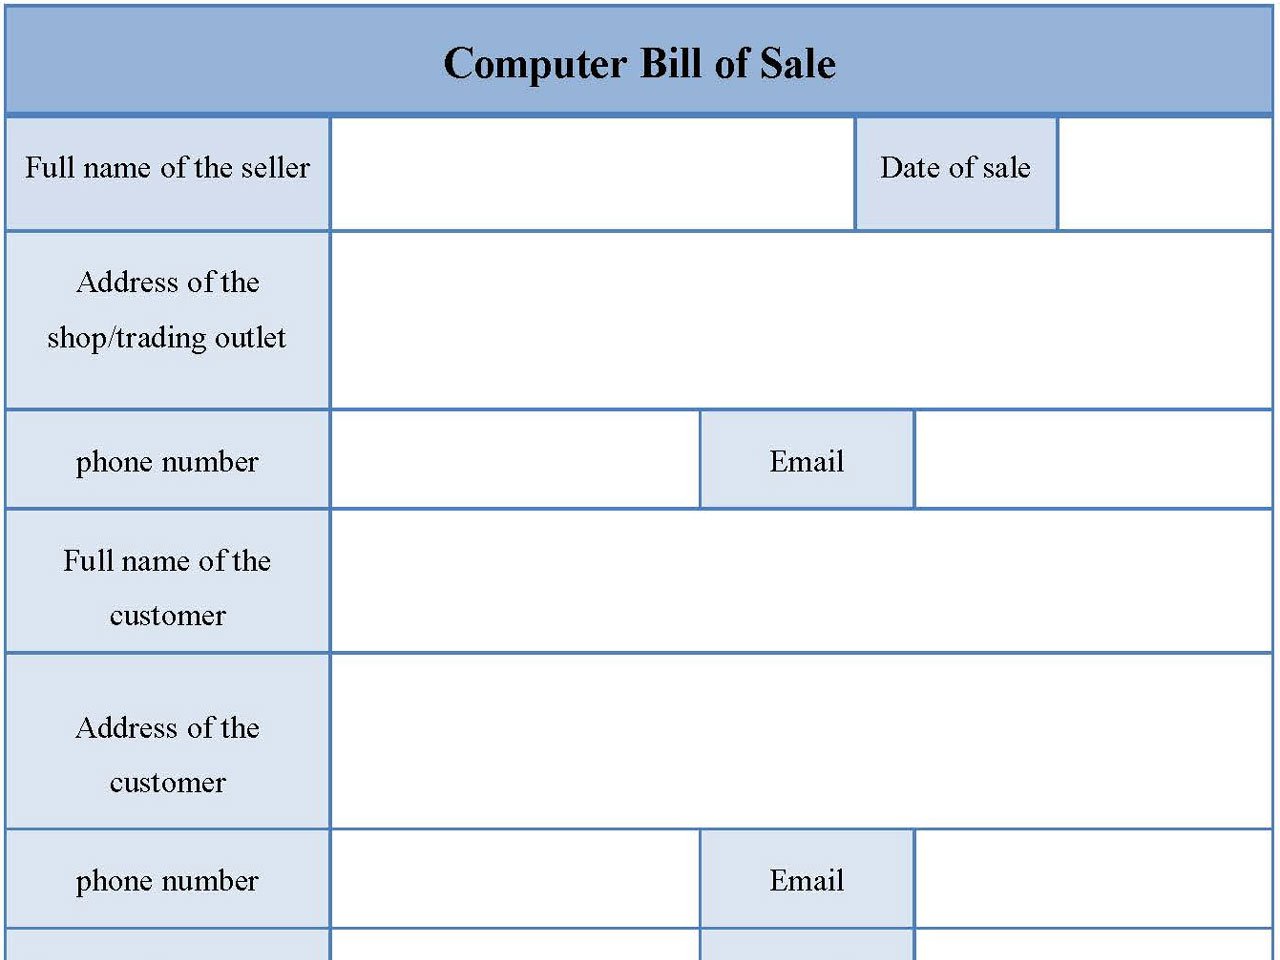 Computer Bill of Sale Form